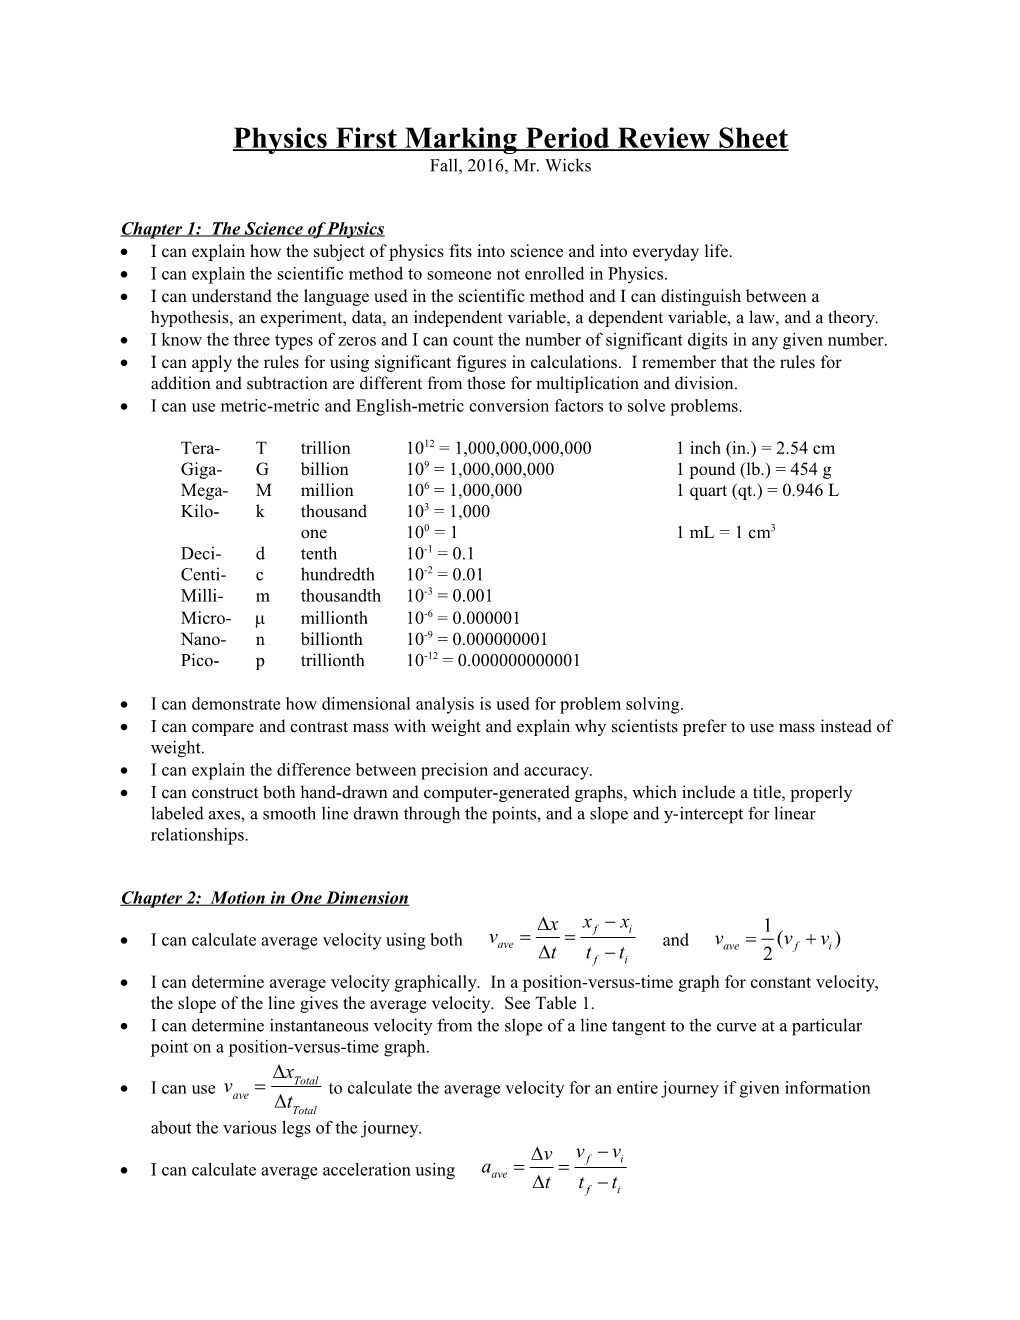 Physics First Marking Period Review Sheet, Page 1